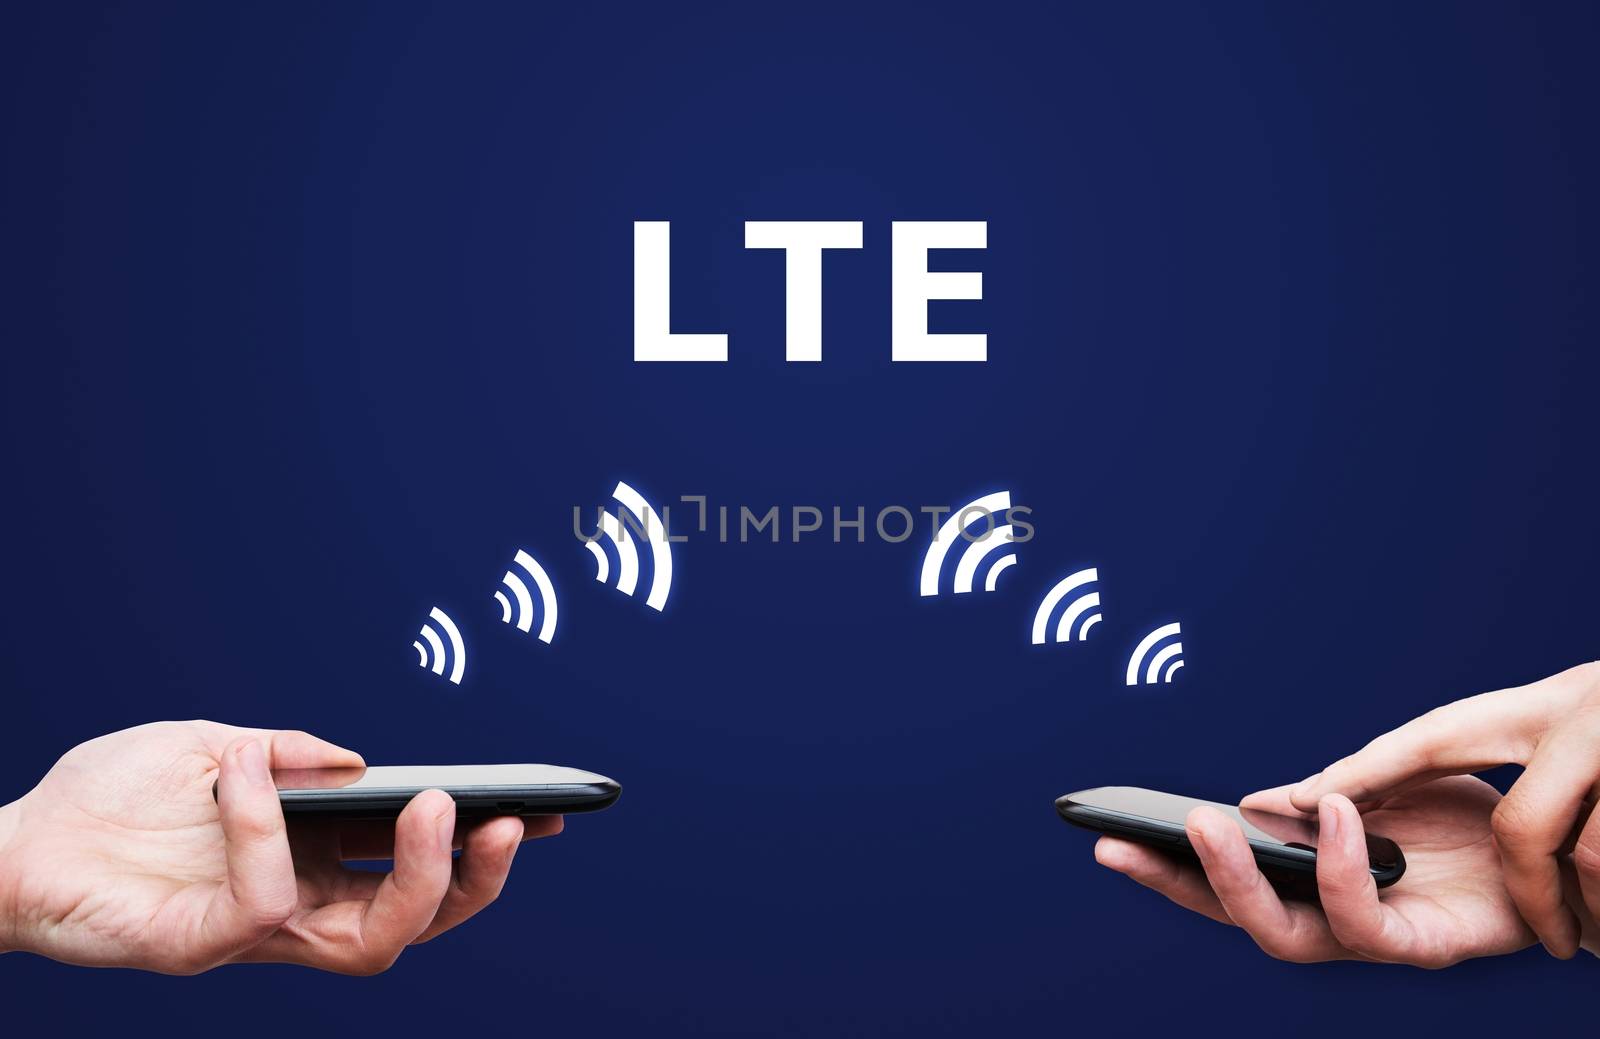 LTE high speed mobile internet connection. by simpson33